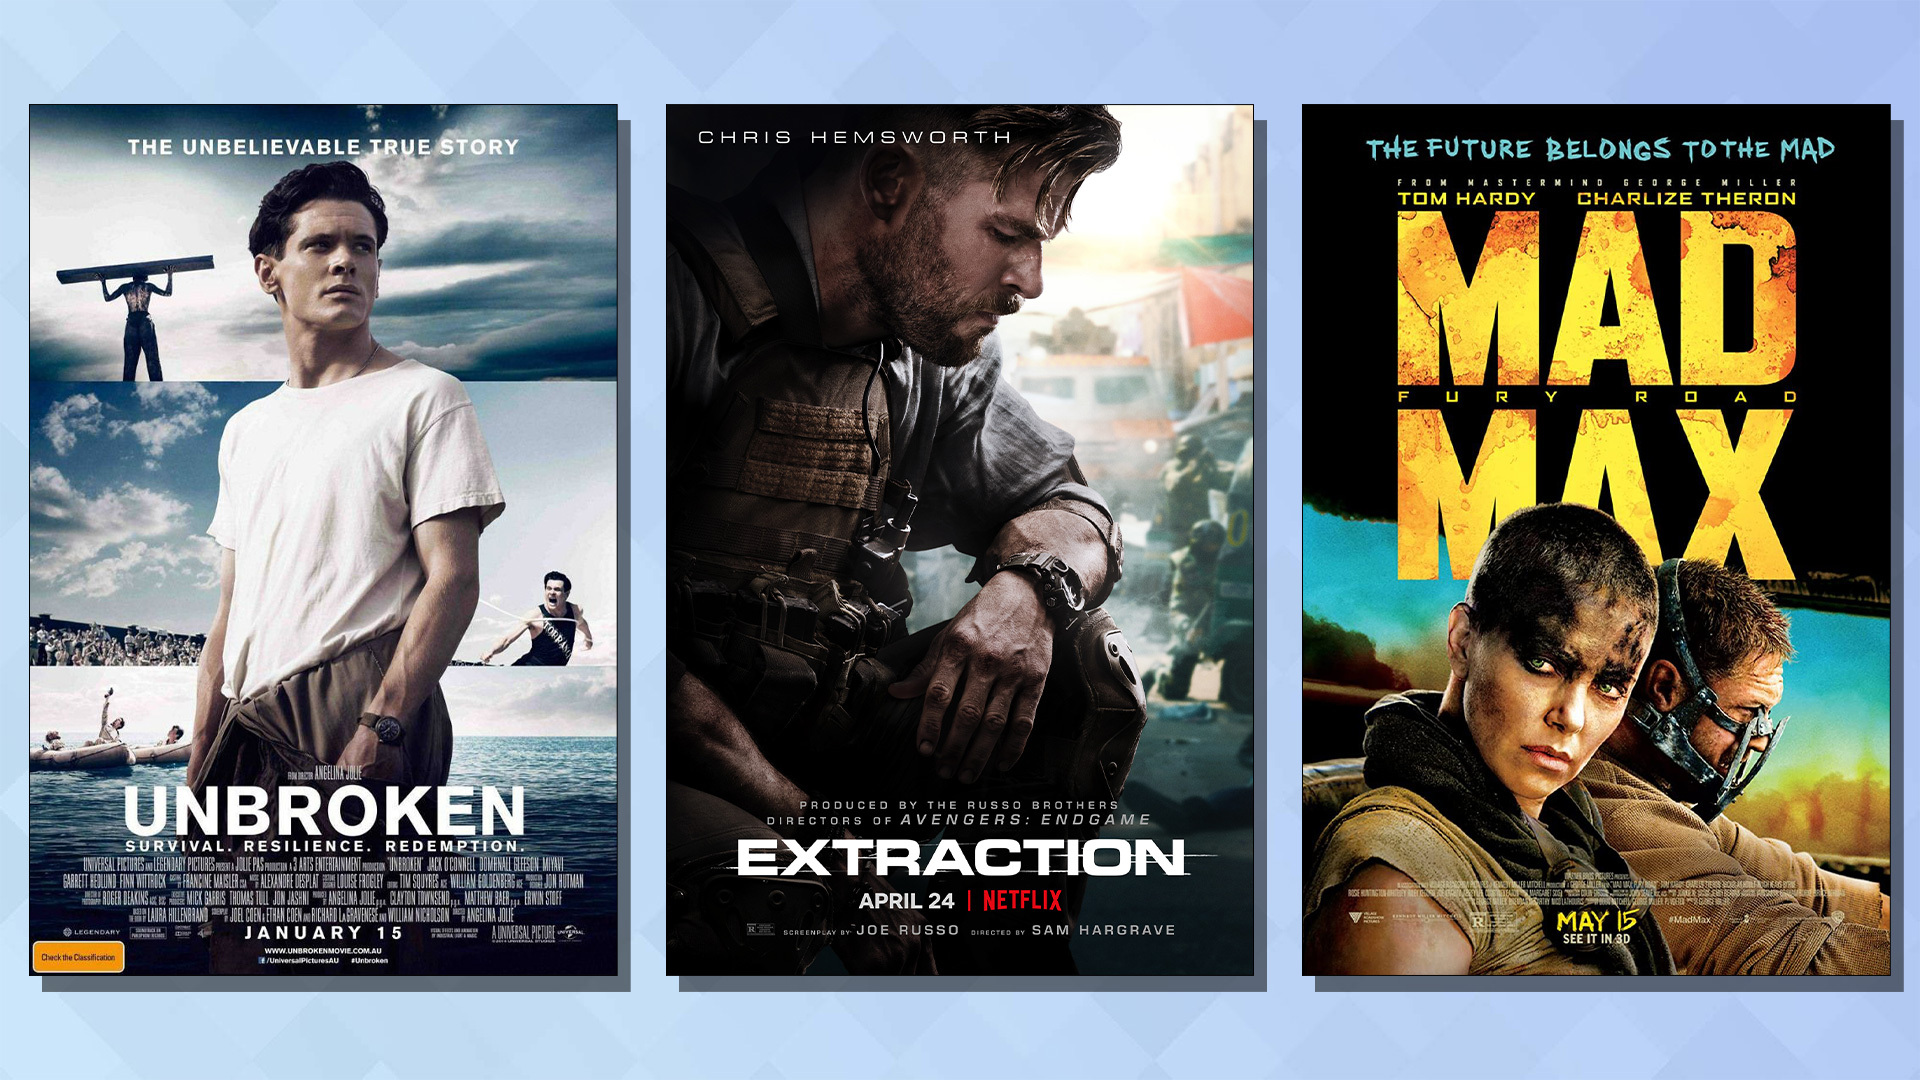 Film covers for Broke, Mad Max and Extraction